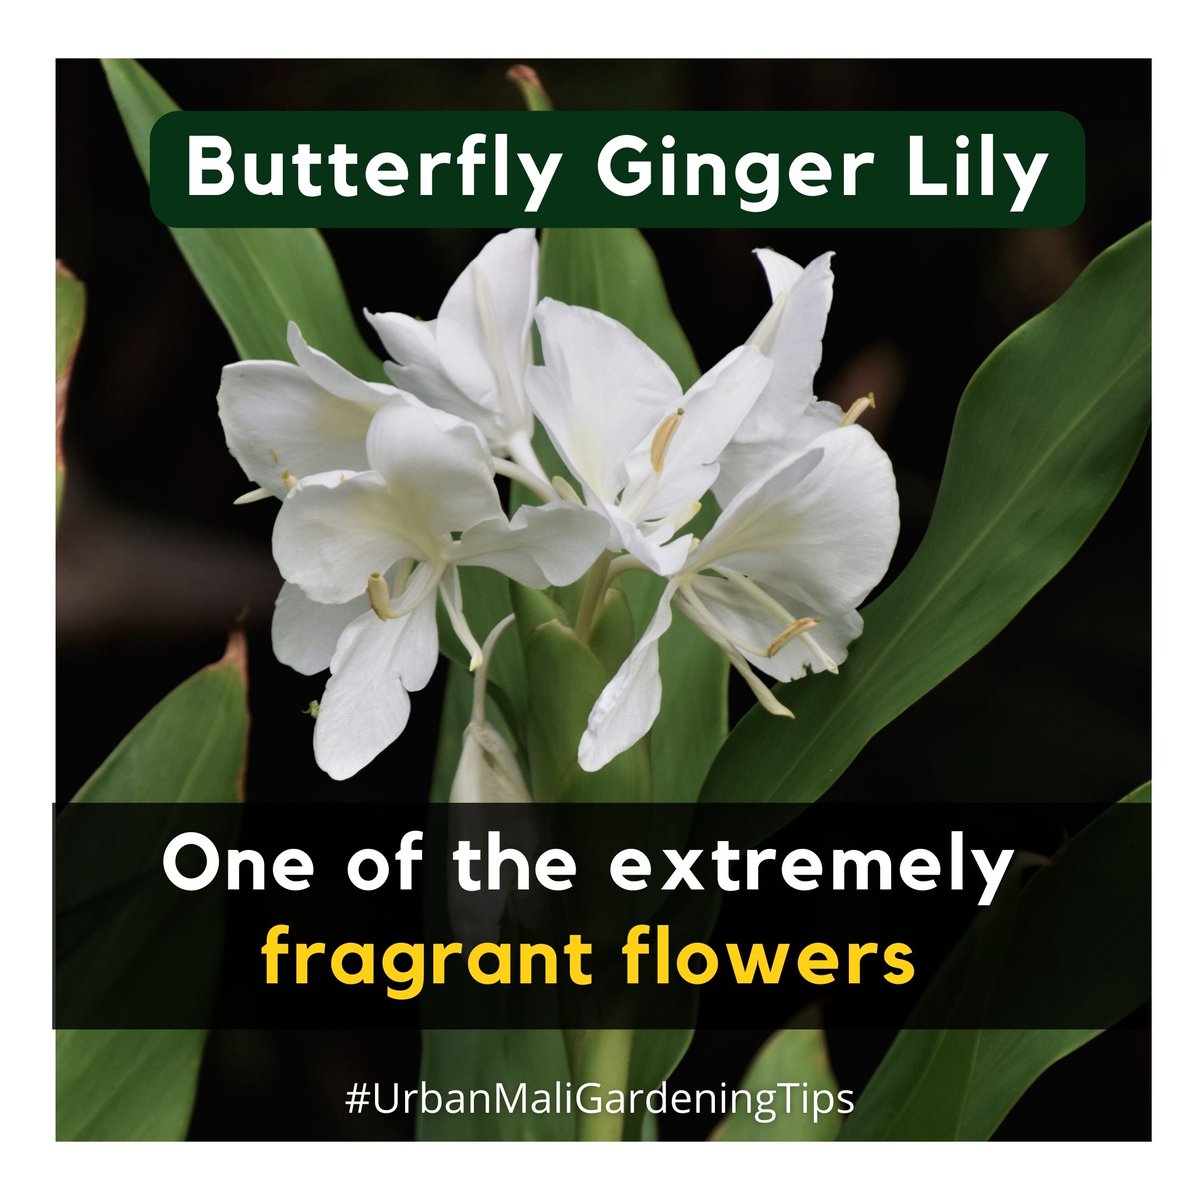 This exquisite flower not only captivates with its beauty but also fills the air with its sweet and intoxicating scent. .  

#ButterflyGingerLily #FragrantFlowers #Nature'sPerfume #GardenBeauty#GreenThumbsUp #plantaddict #plantlife #urbangardening #homegardening #urbanmali